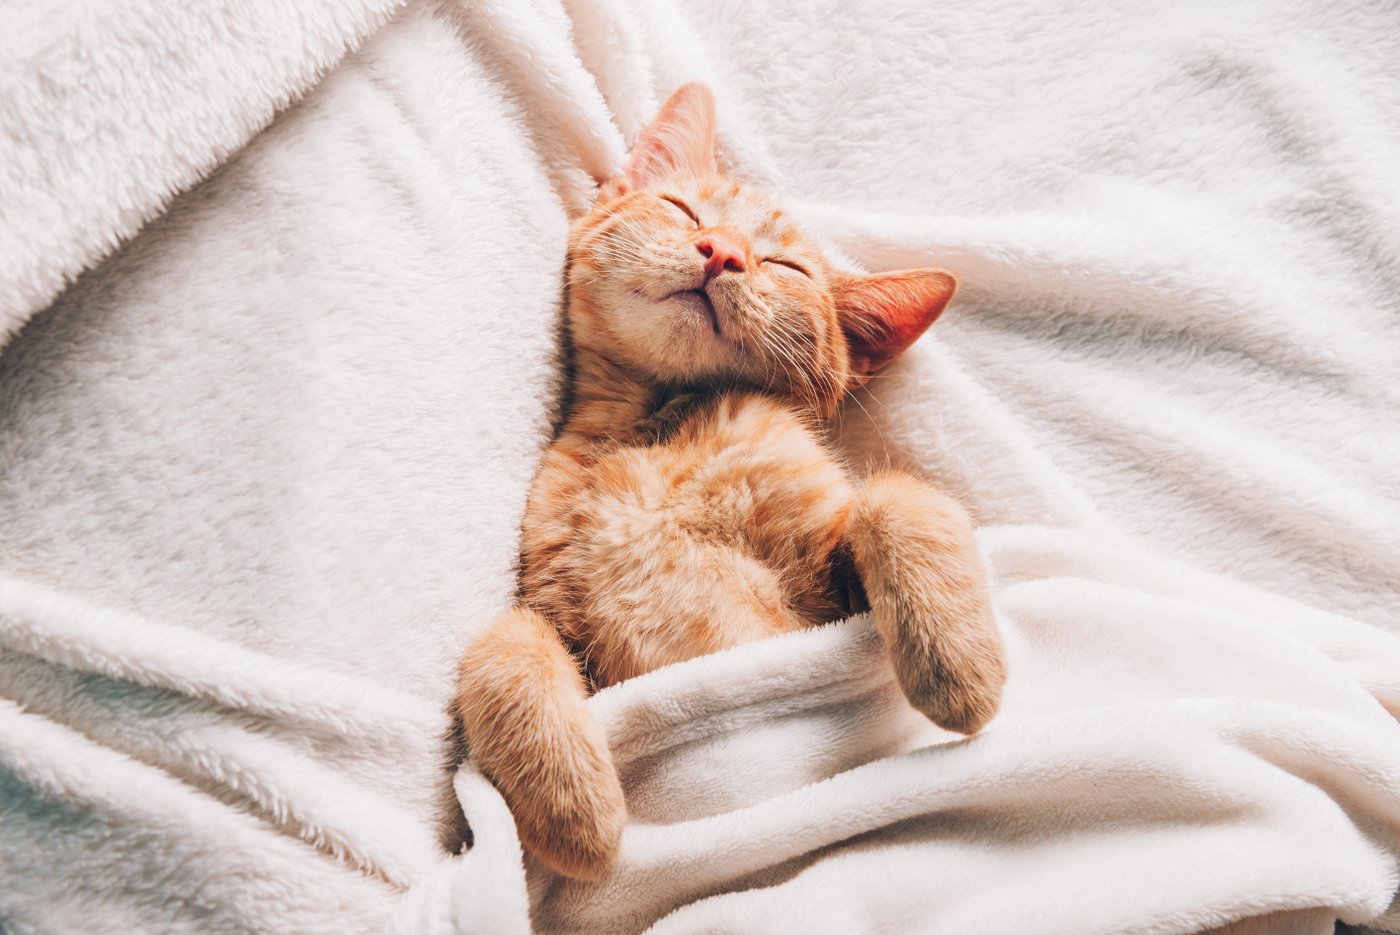 Cute ginger cat cuddled up in bed